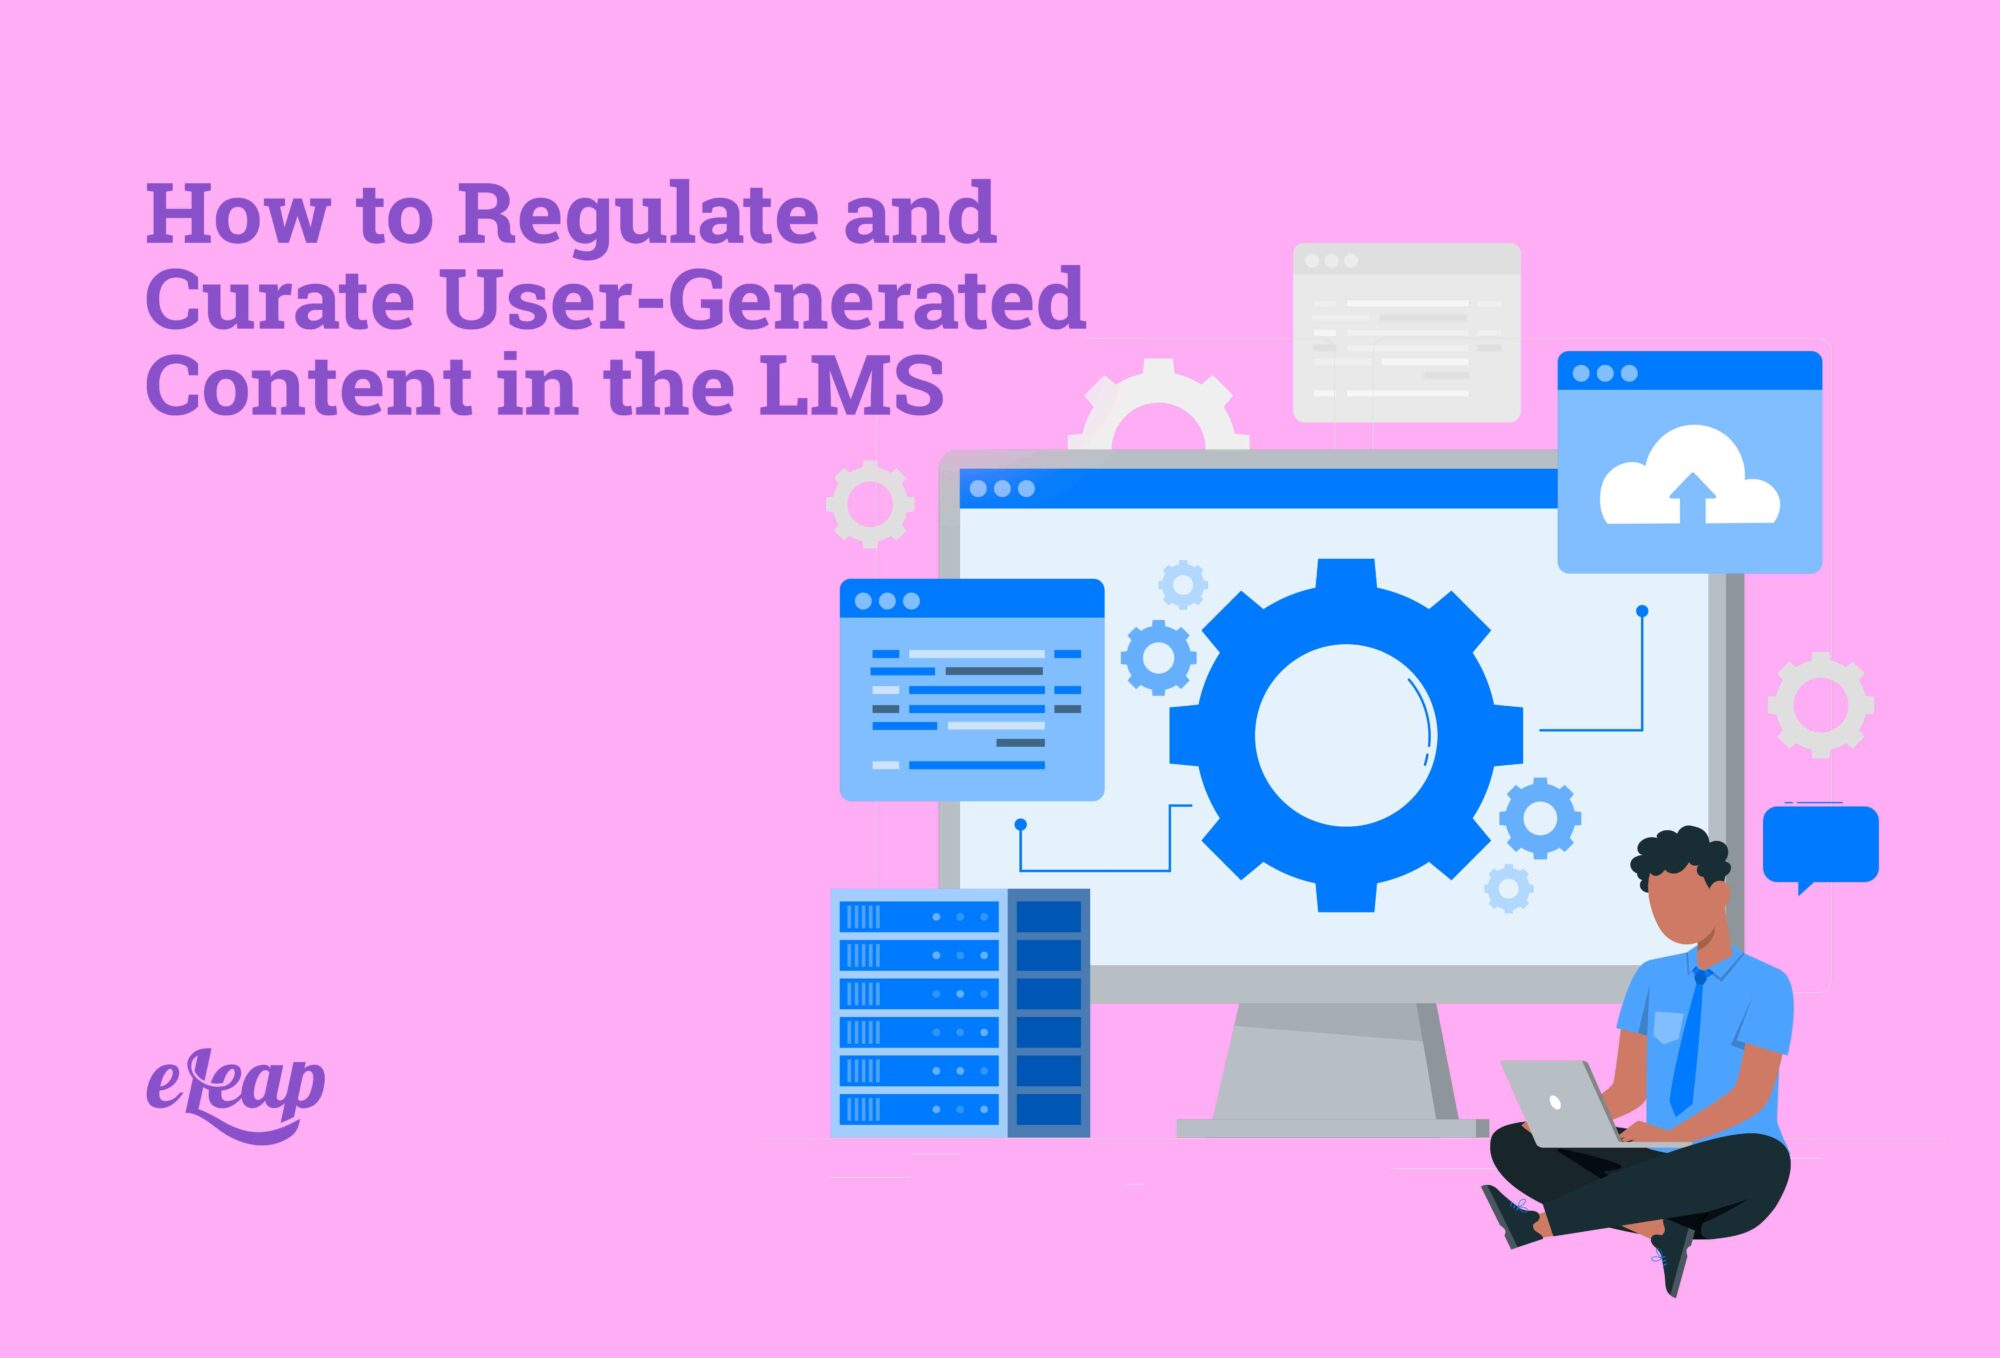 How to Regulate and Curate User-Generated Content in the LMS